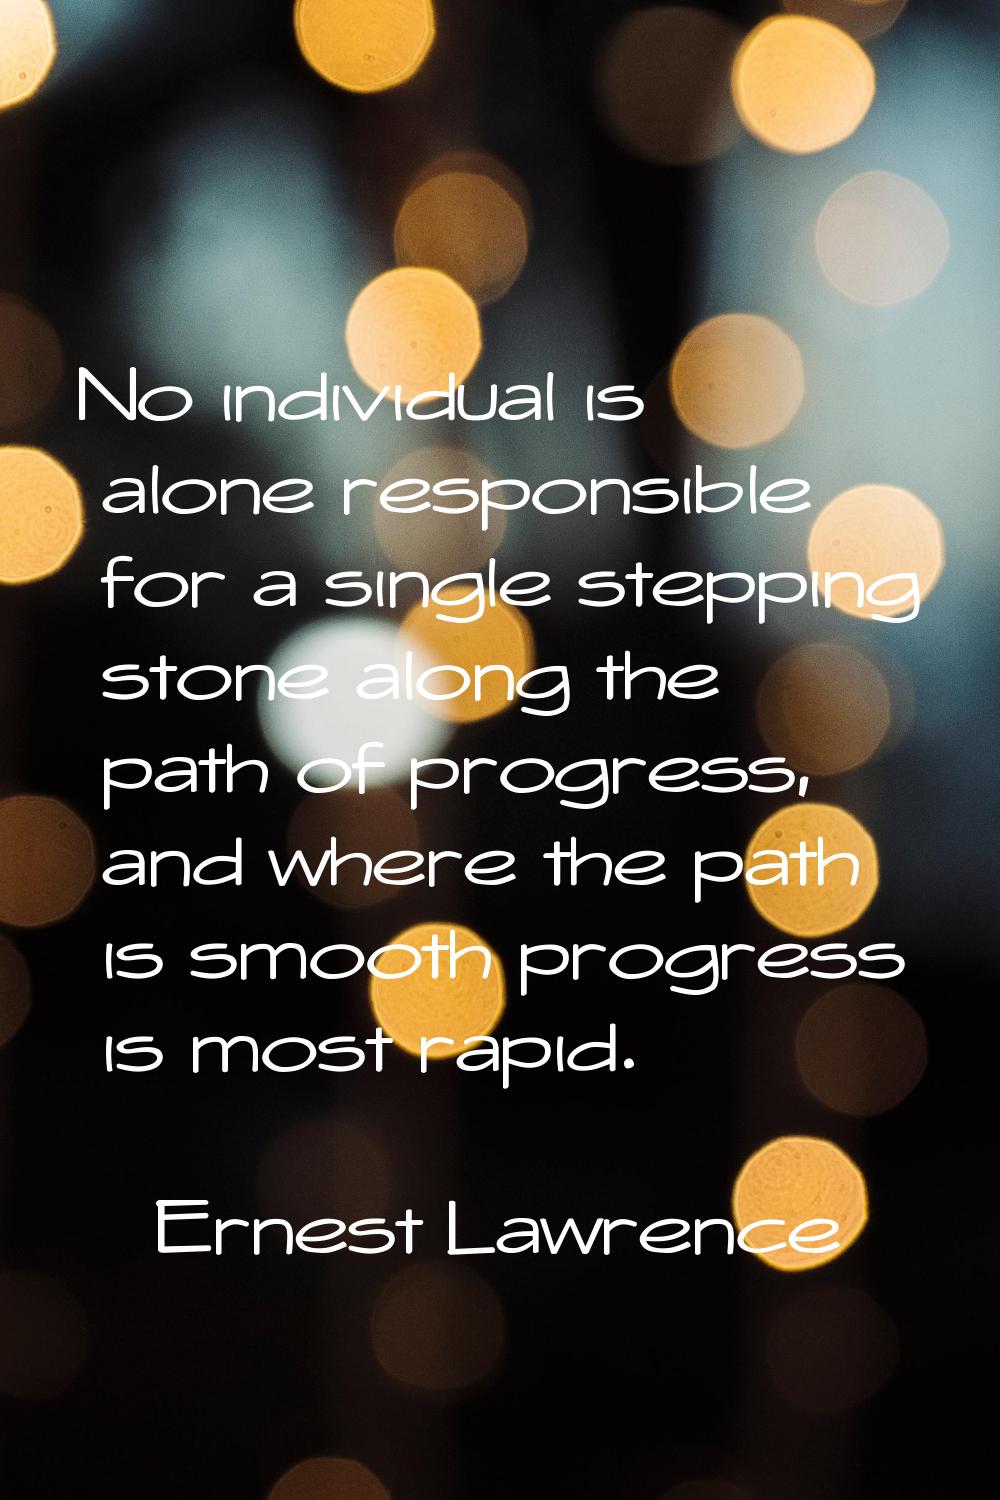 No individual is alone responsible for a single stepping stone along the path of progress, and wher